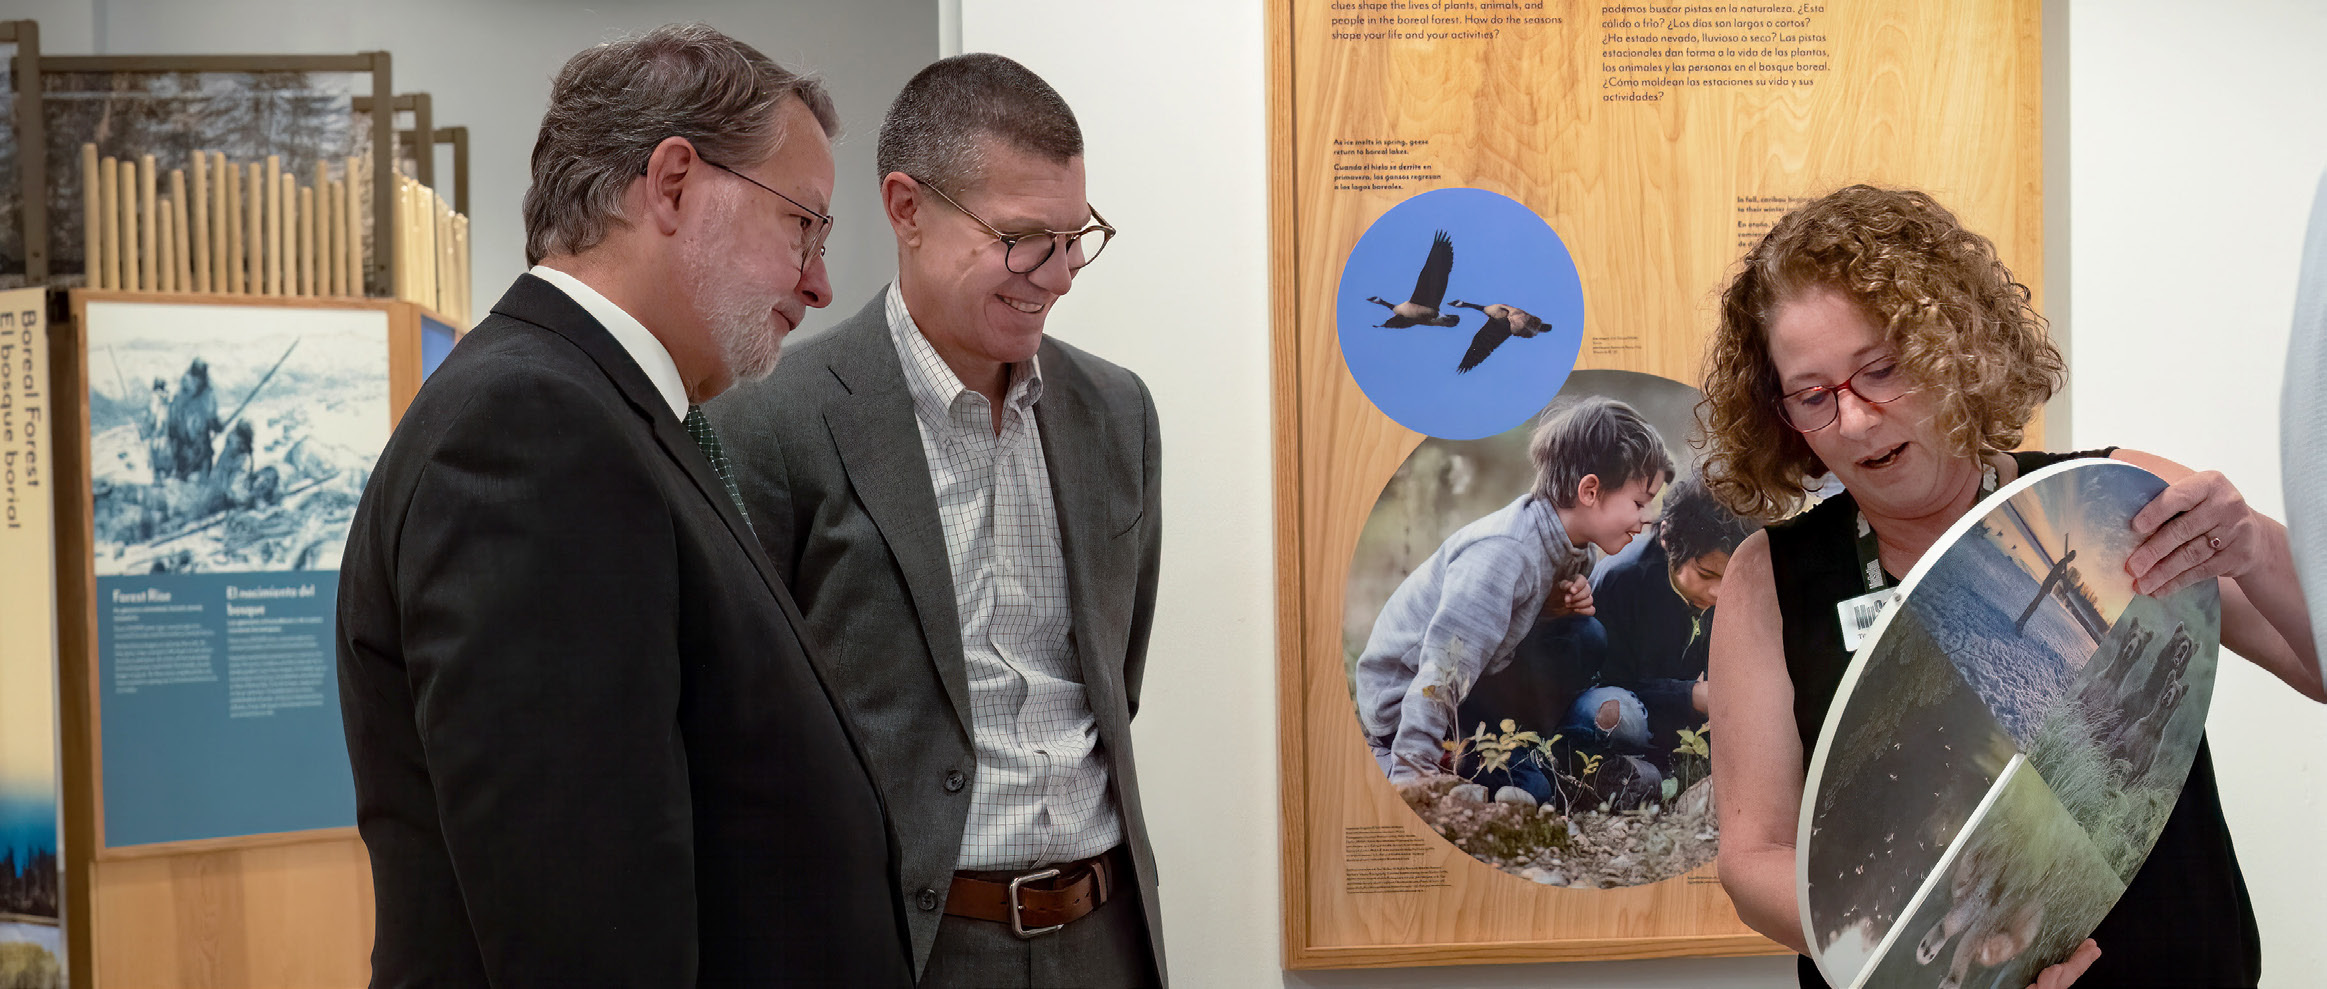 Photo of U.S. Senator Gary Peters visiting the “Knowing Nature: Stories of the Boreal Forest” exhibition.